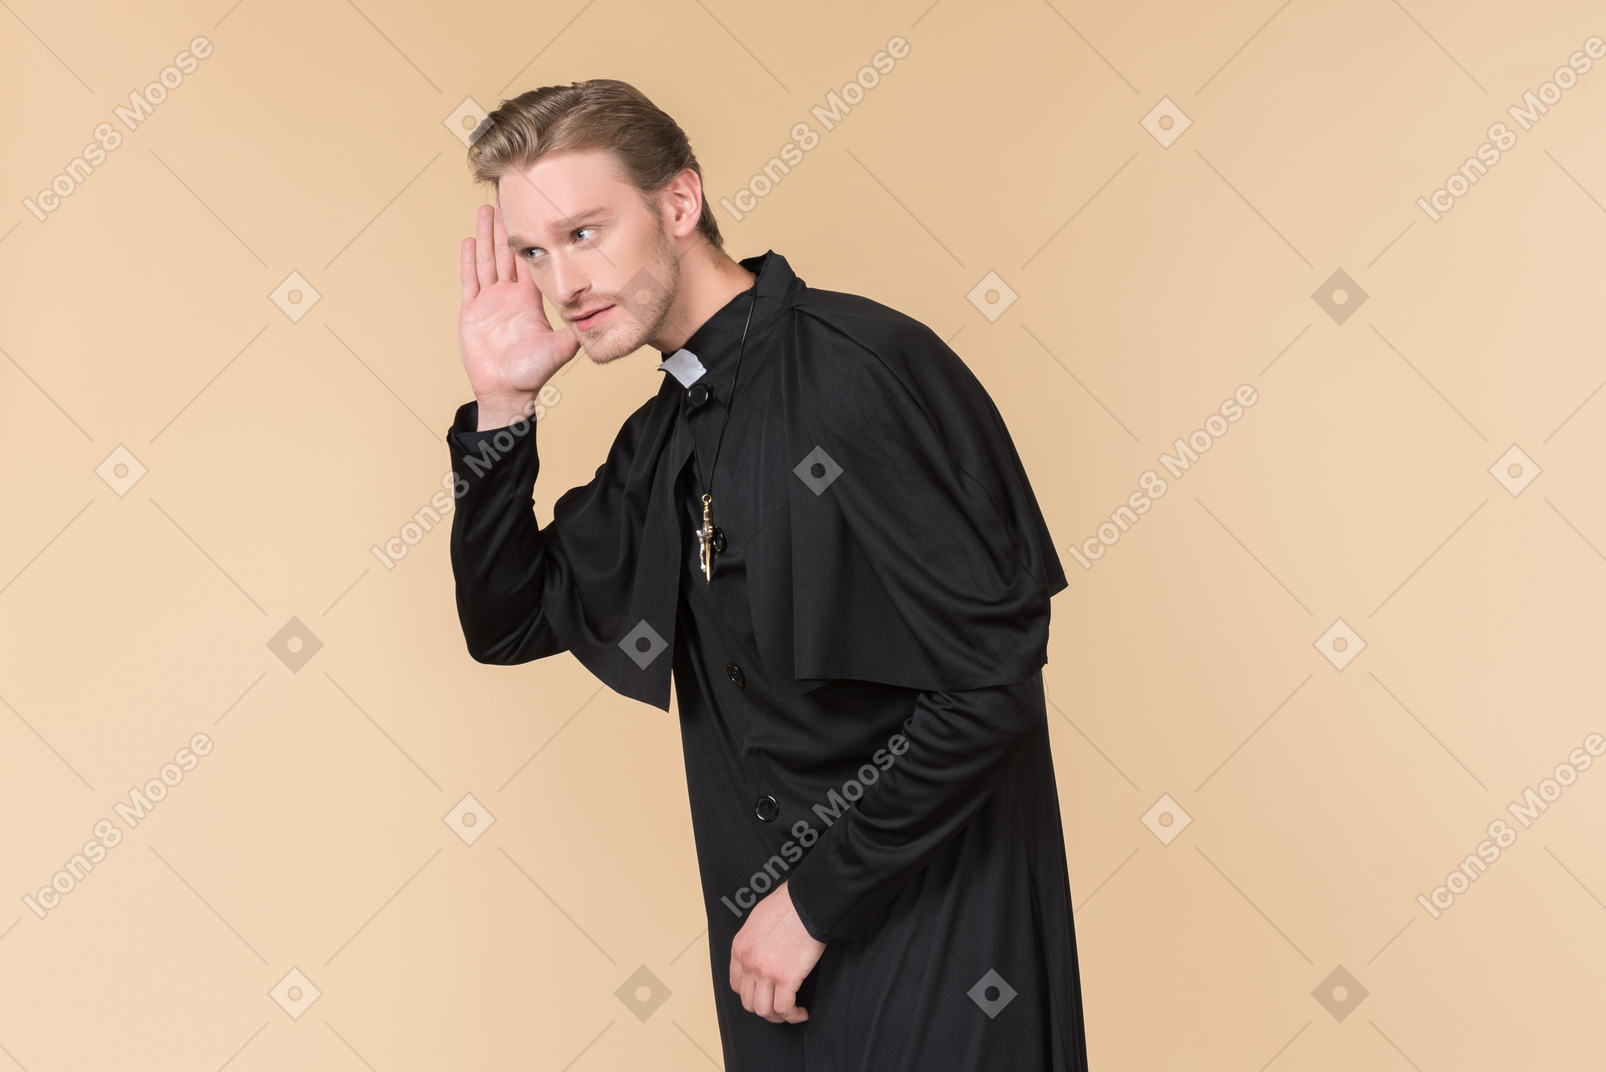 Catholic priest holding hand close to an ear and listening carefully